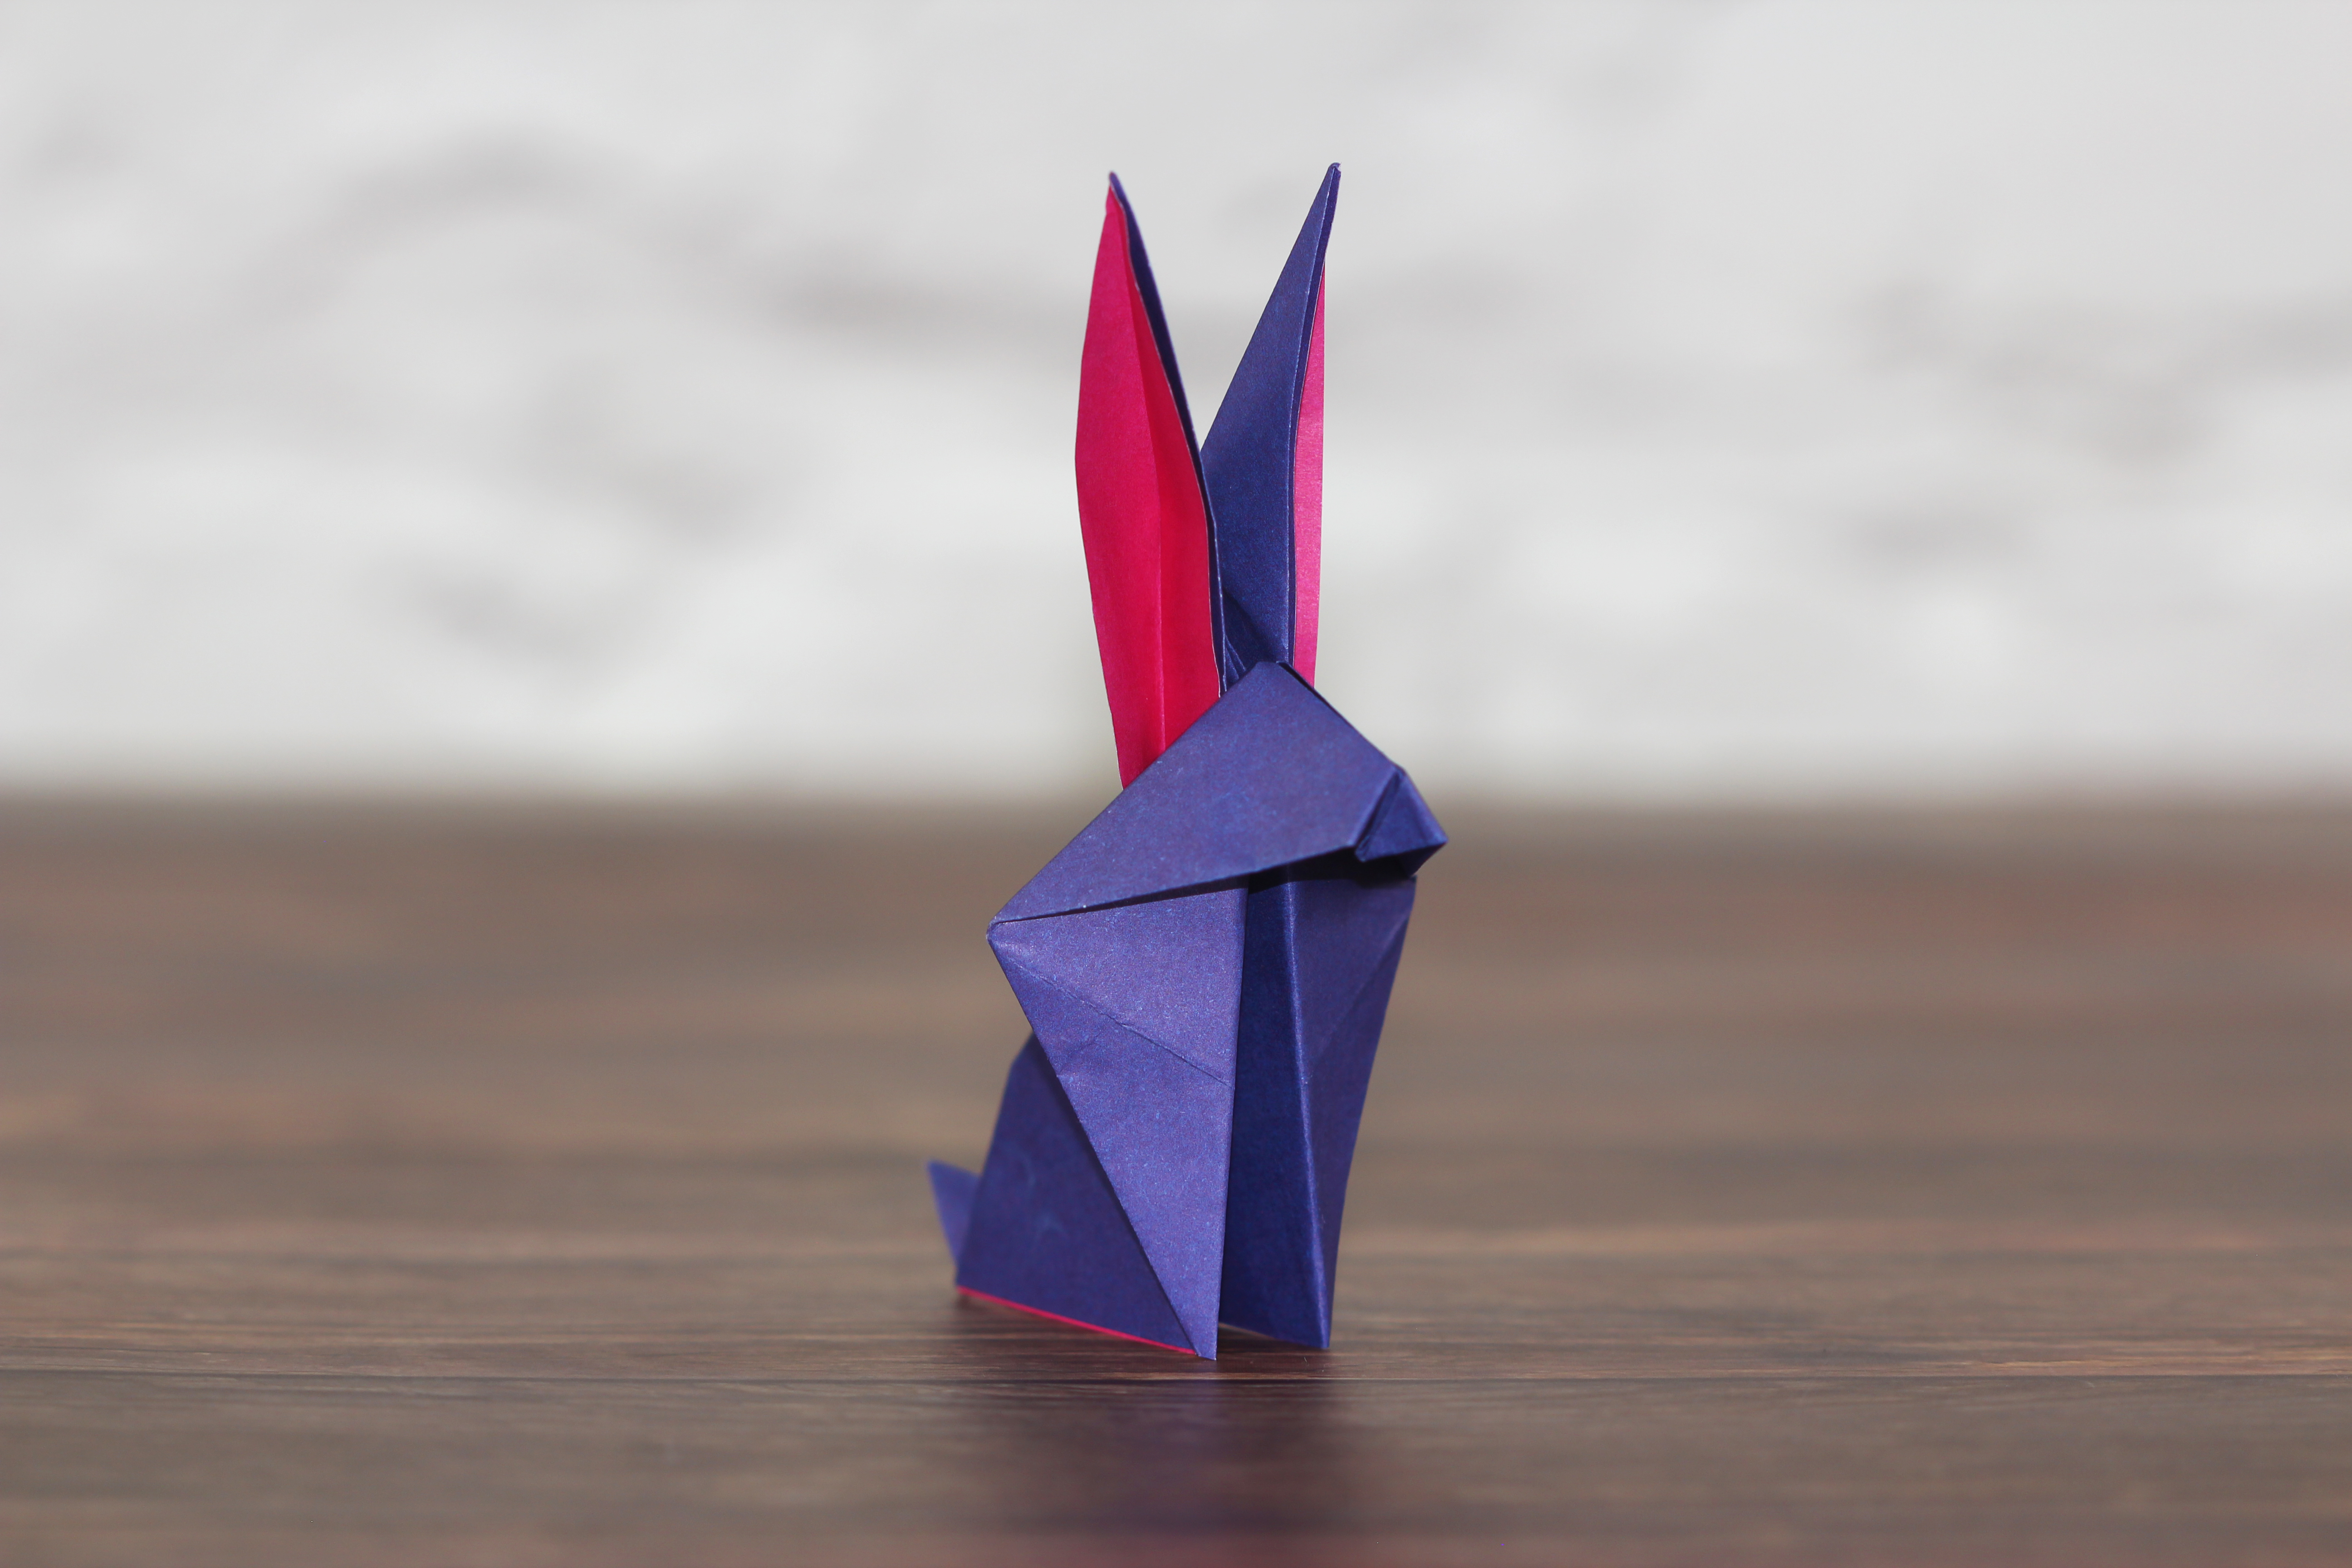 How to make an origami rabbit – completed model 2